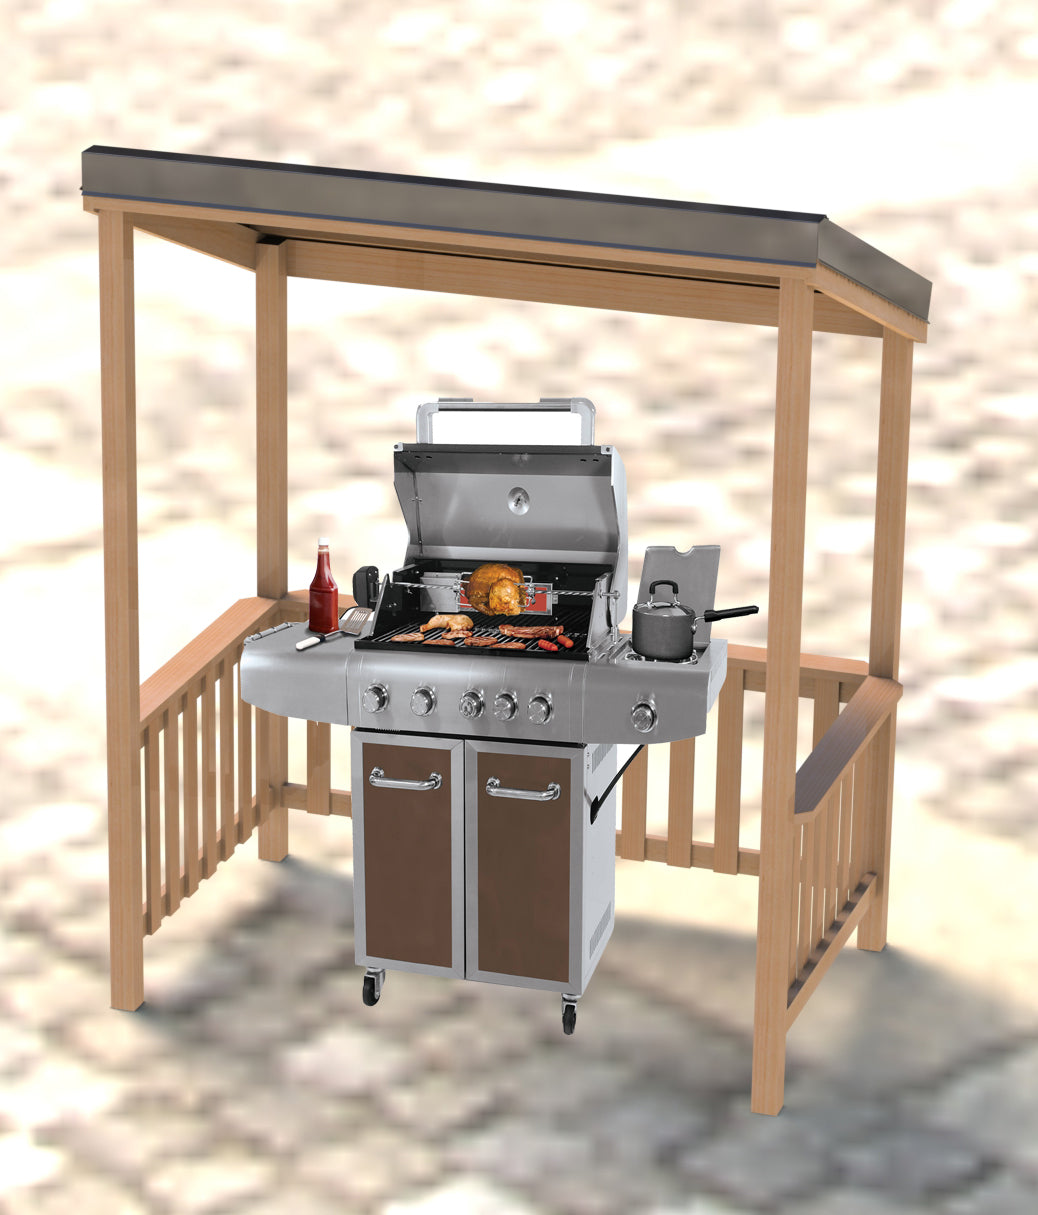 5' x 8' Grill Shelter Step by Step Building Plans